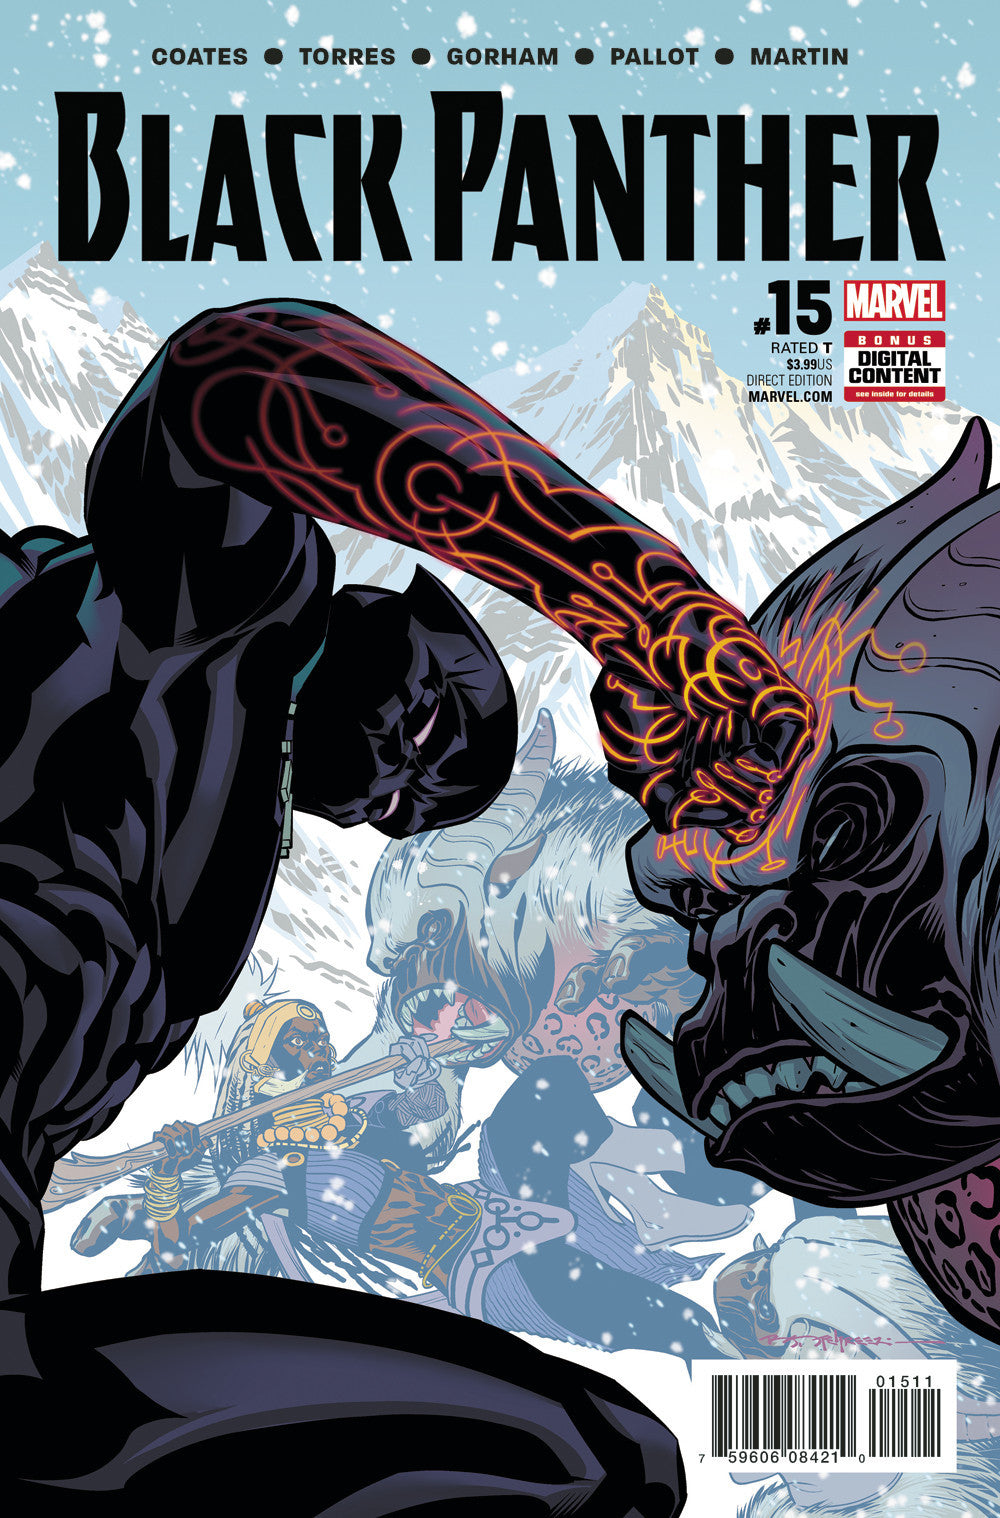 BLACK PANTHER #15 COVER